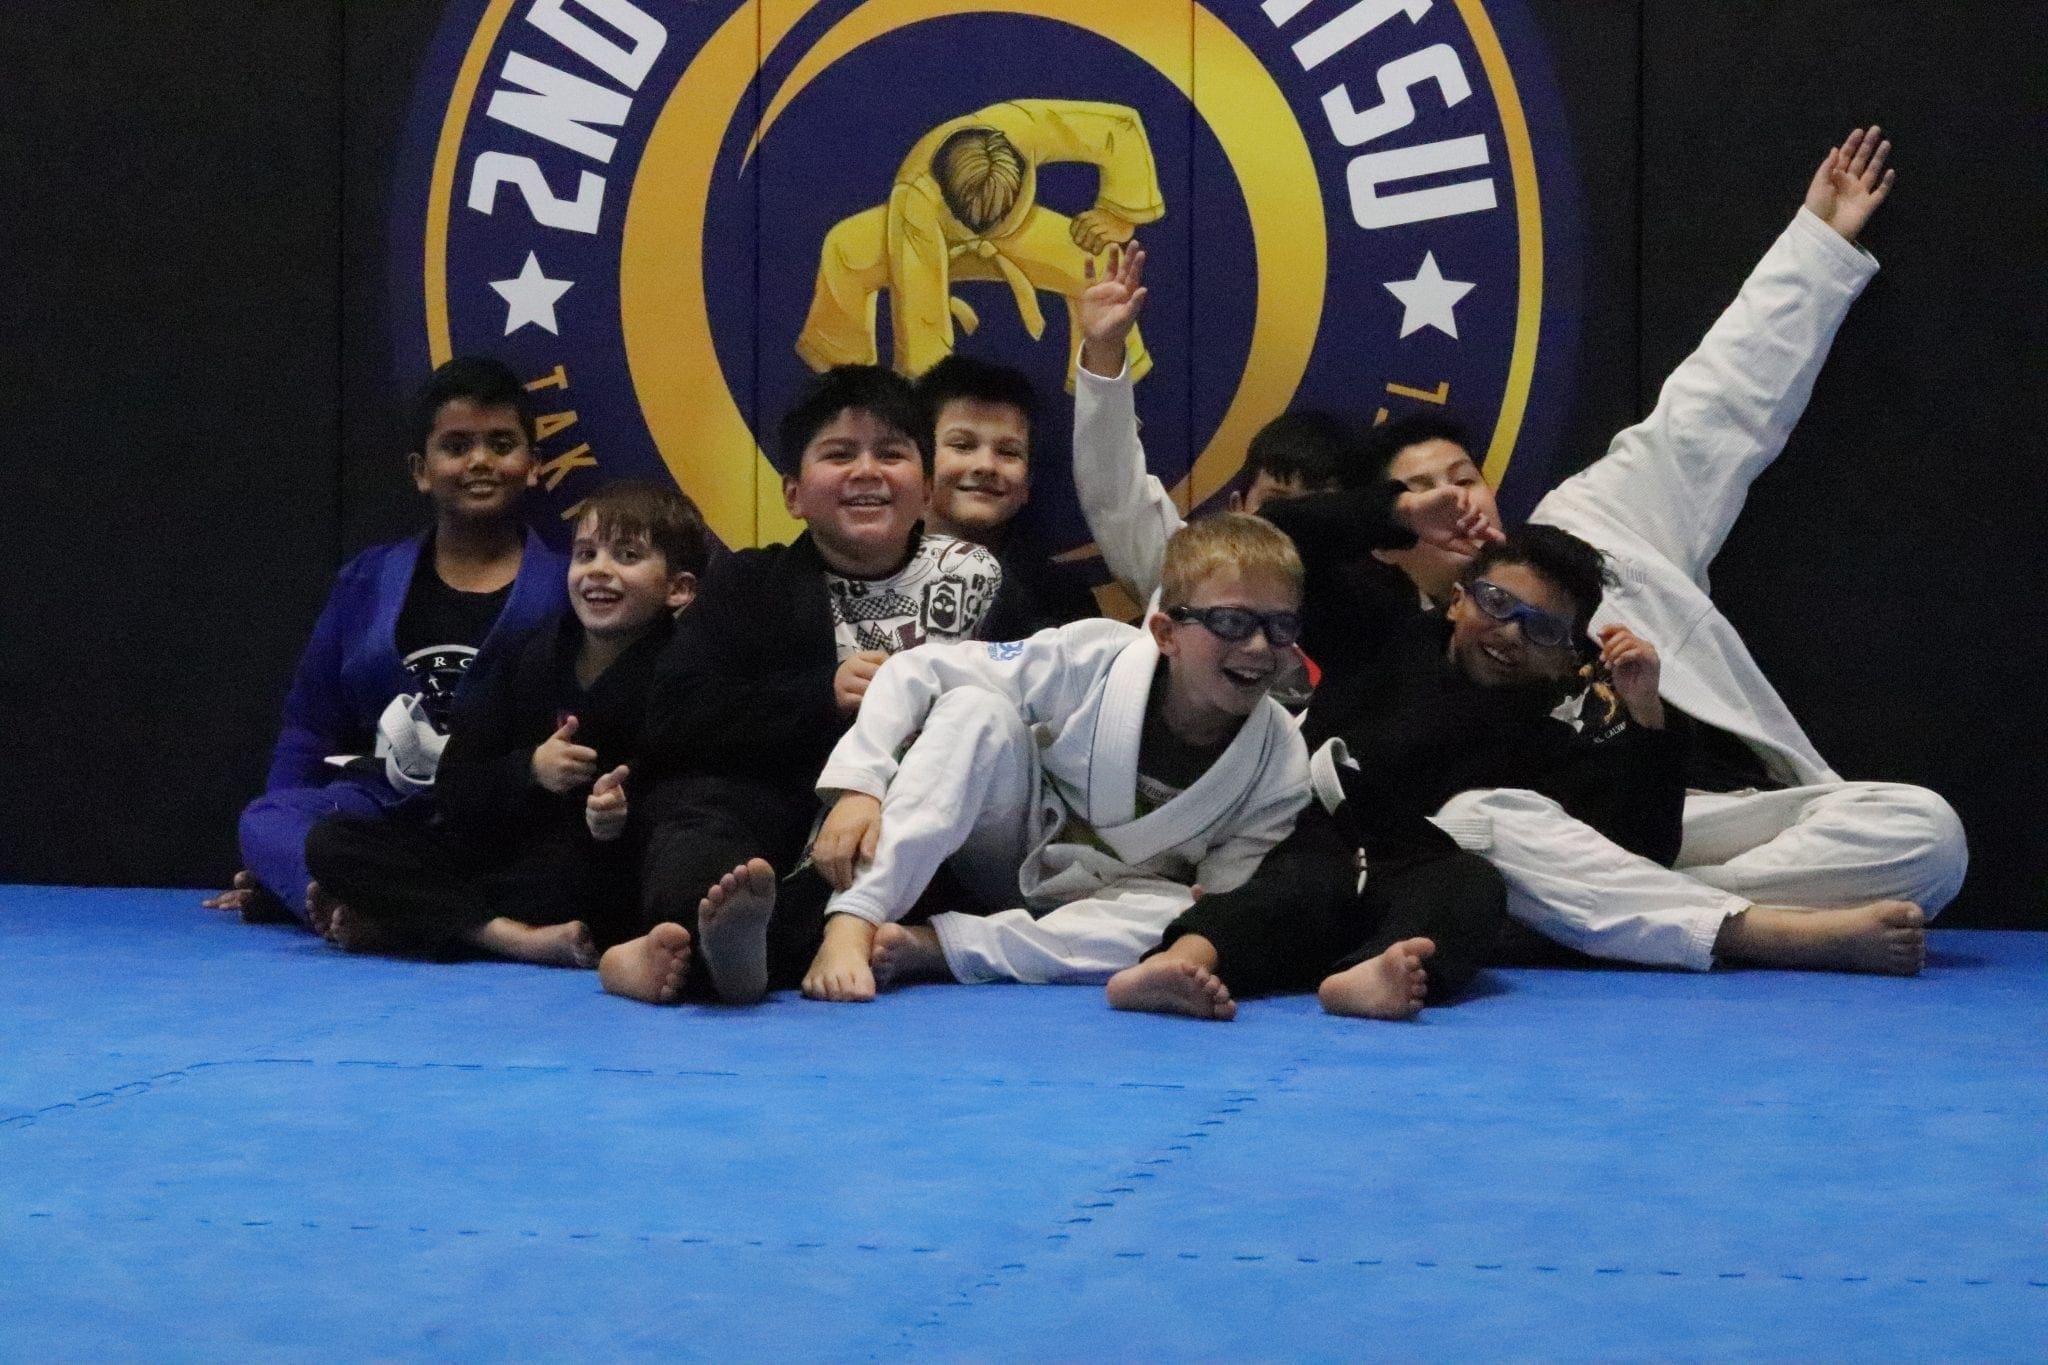 Our kids martial arts students having fun